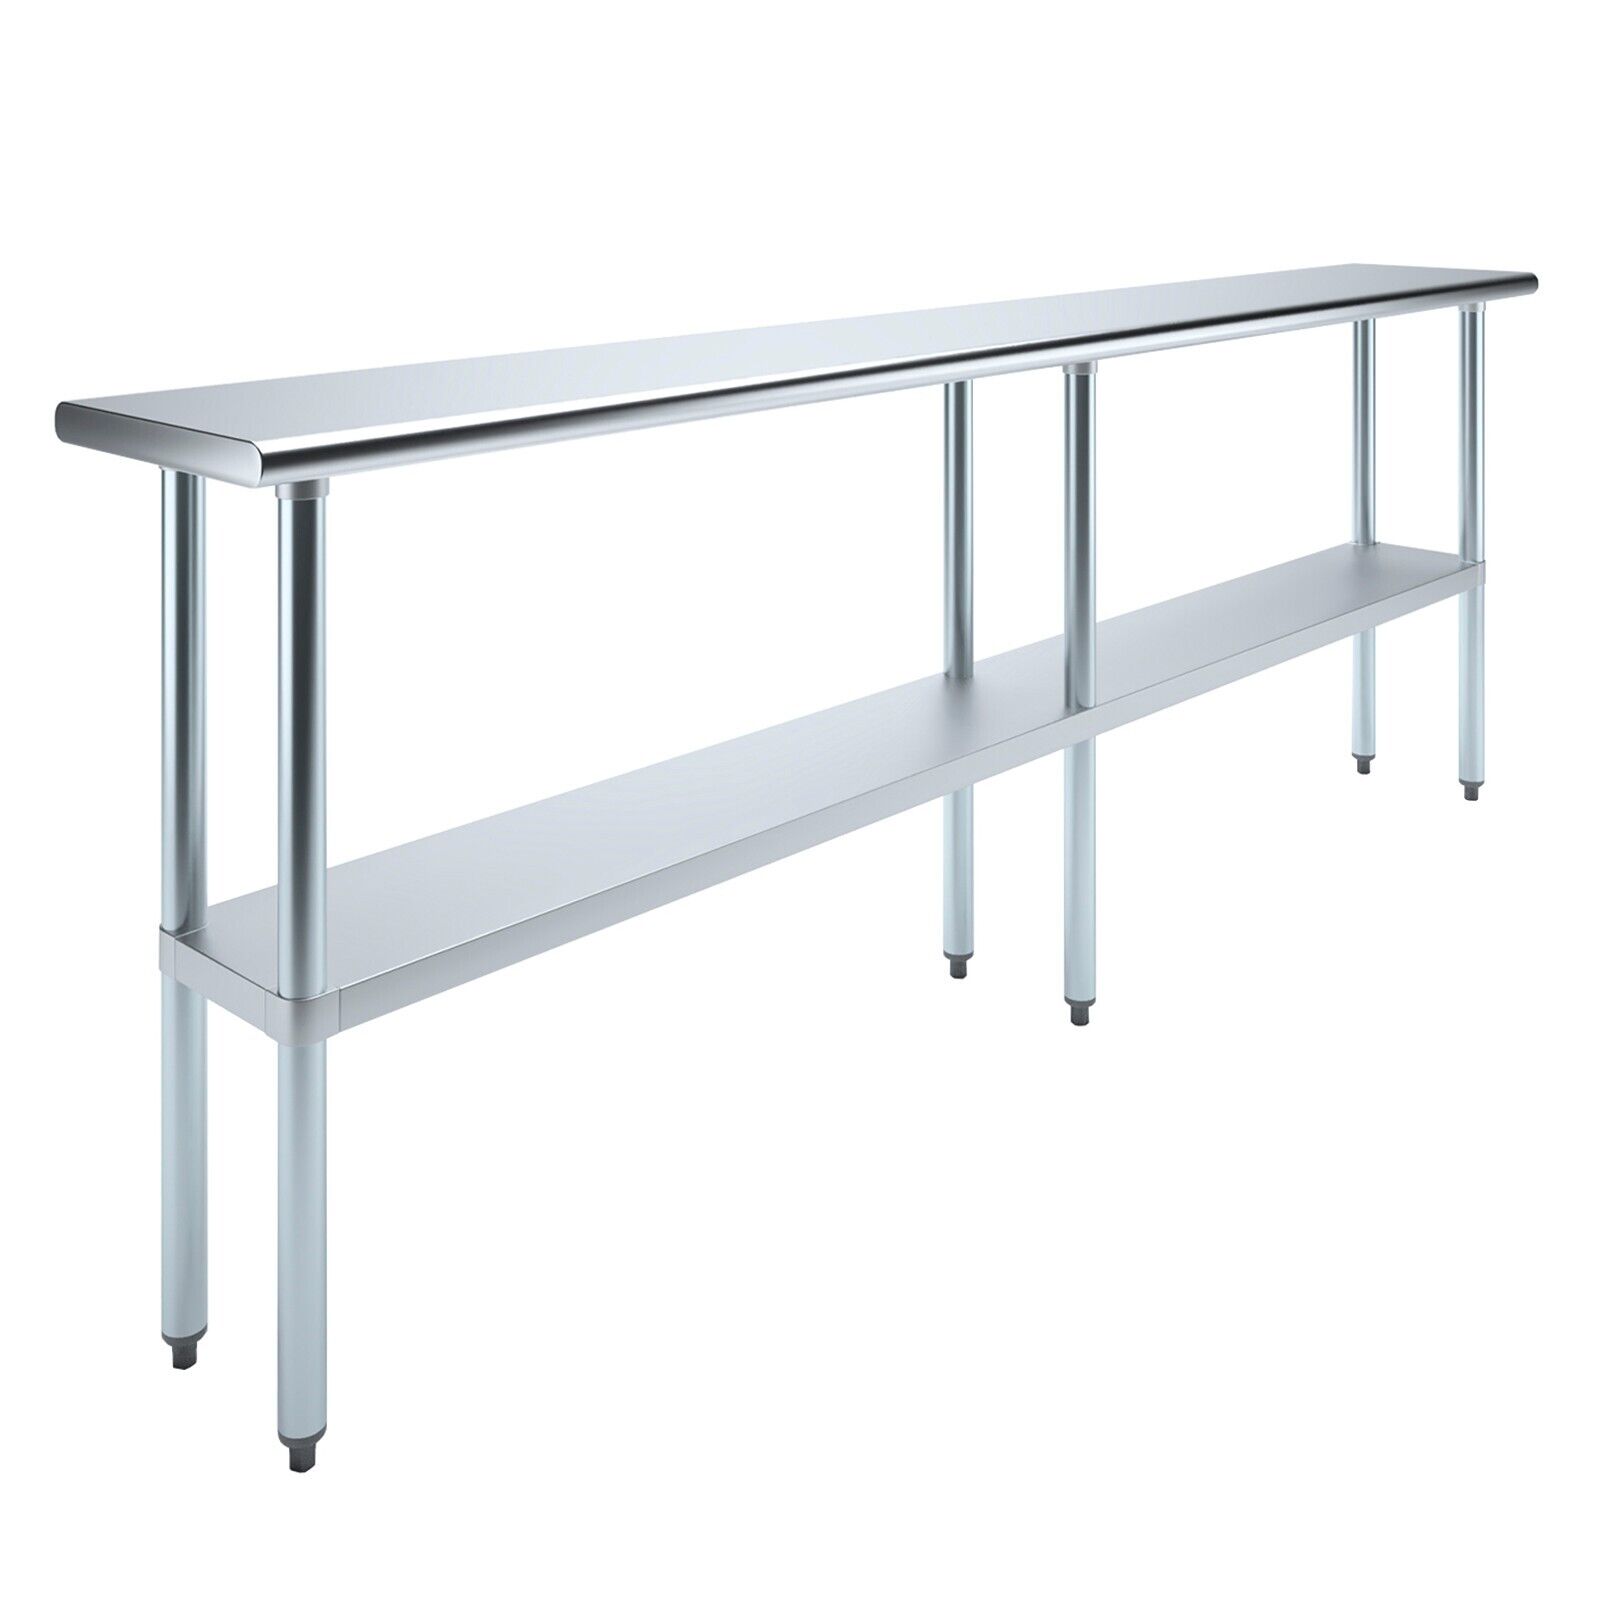 14 in. x 96 in. Stainless Steel Work Table | Metal Utility Table